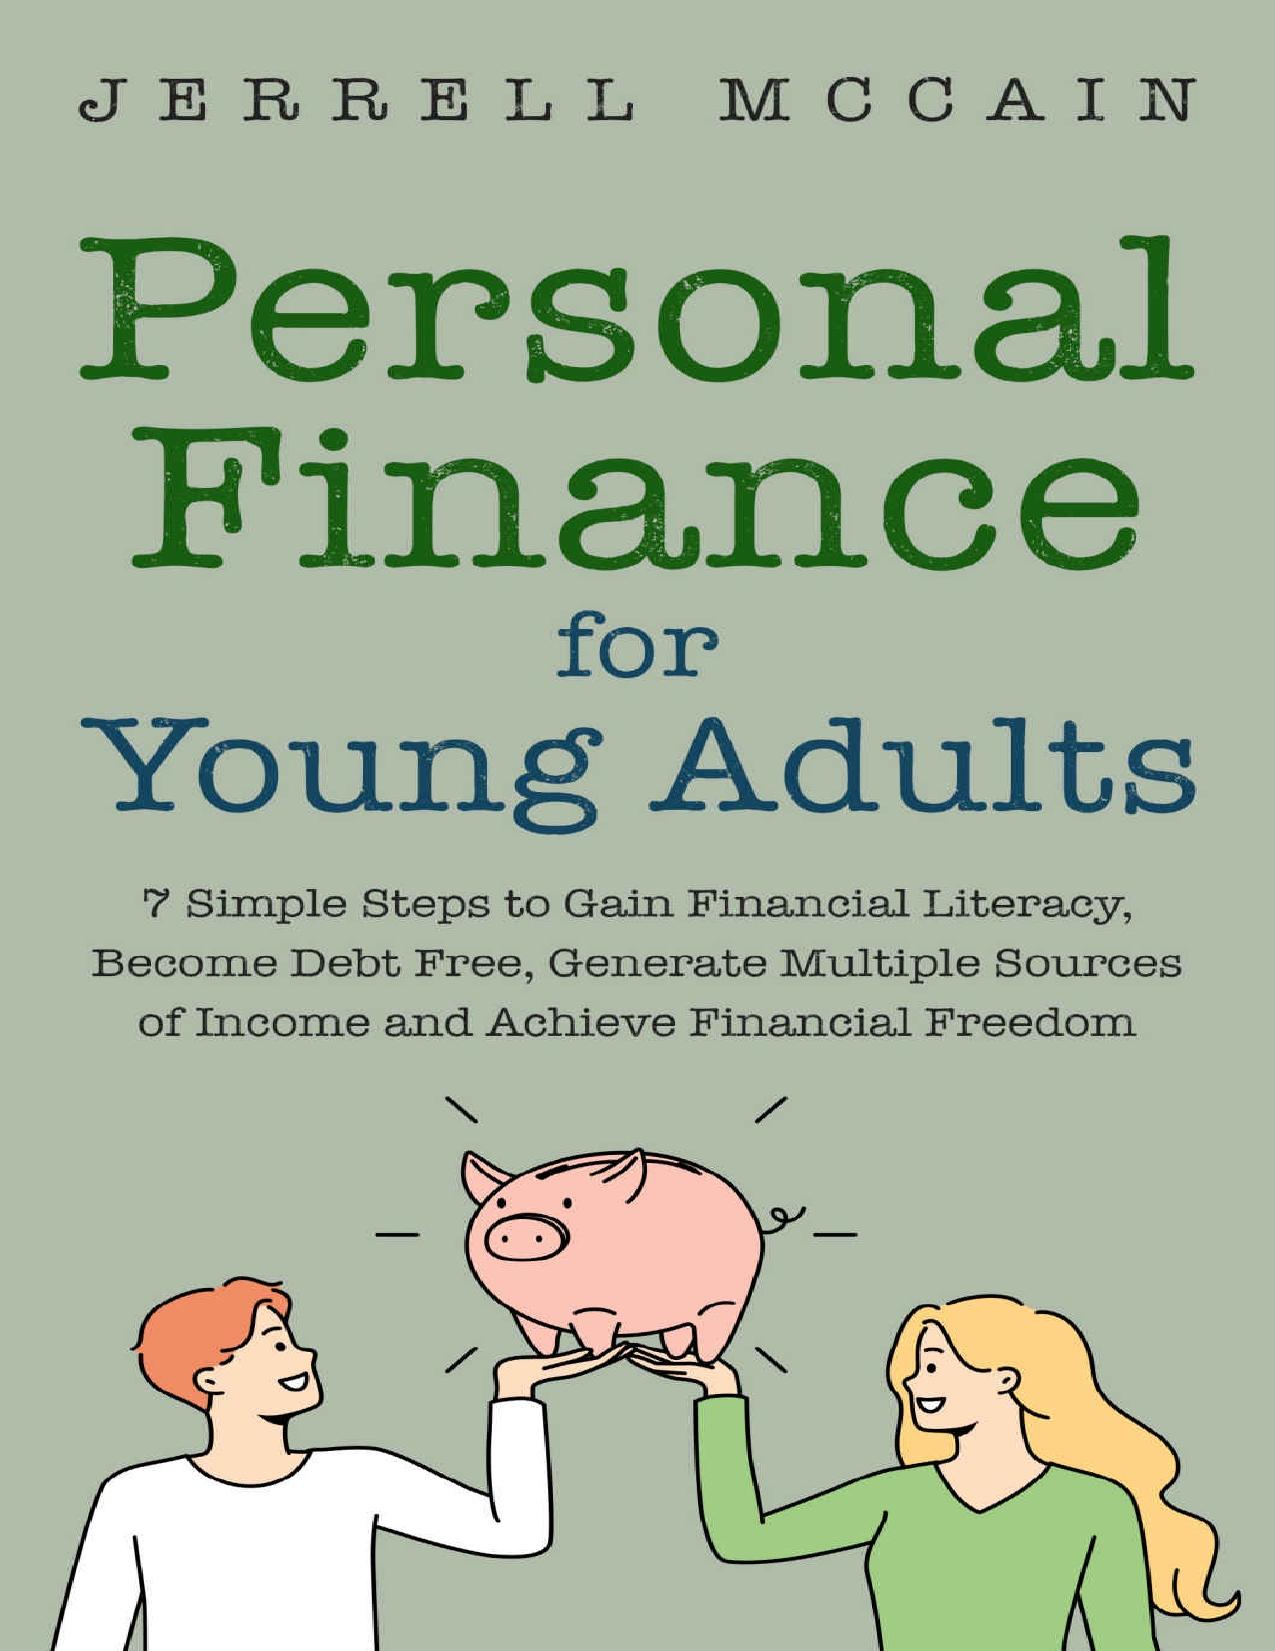 Personal Finance For Young Adults by Mccain Jerrell